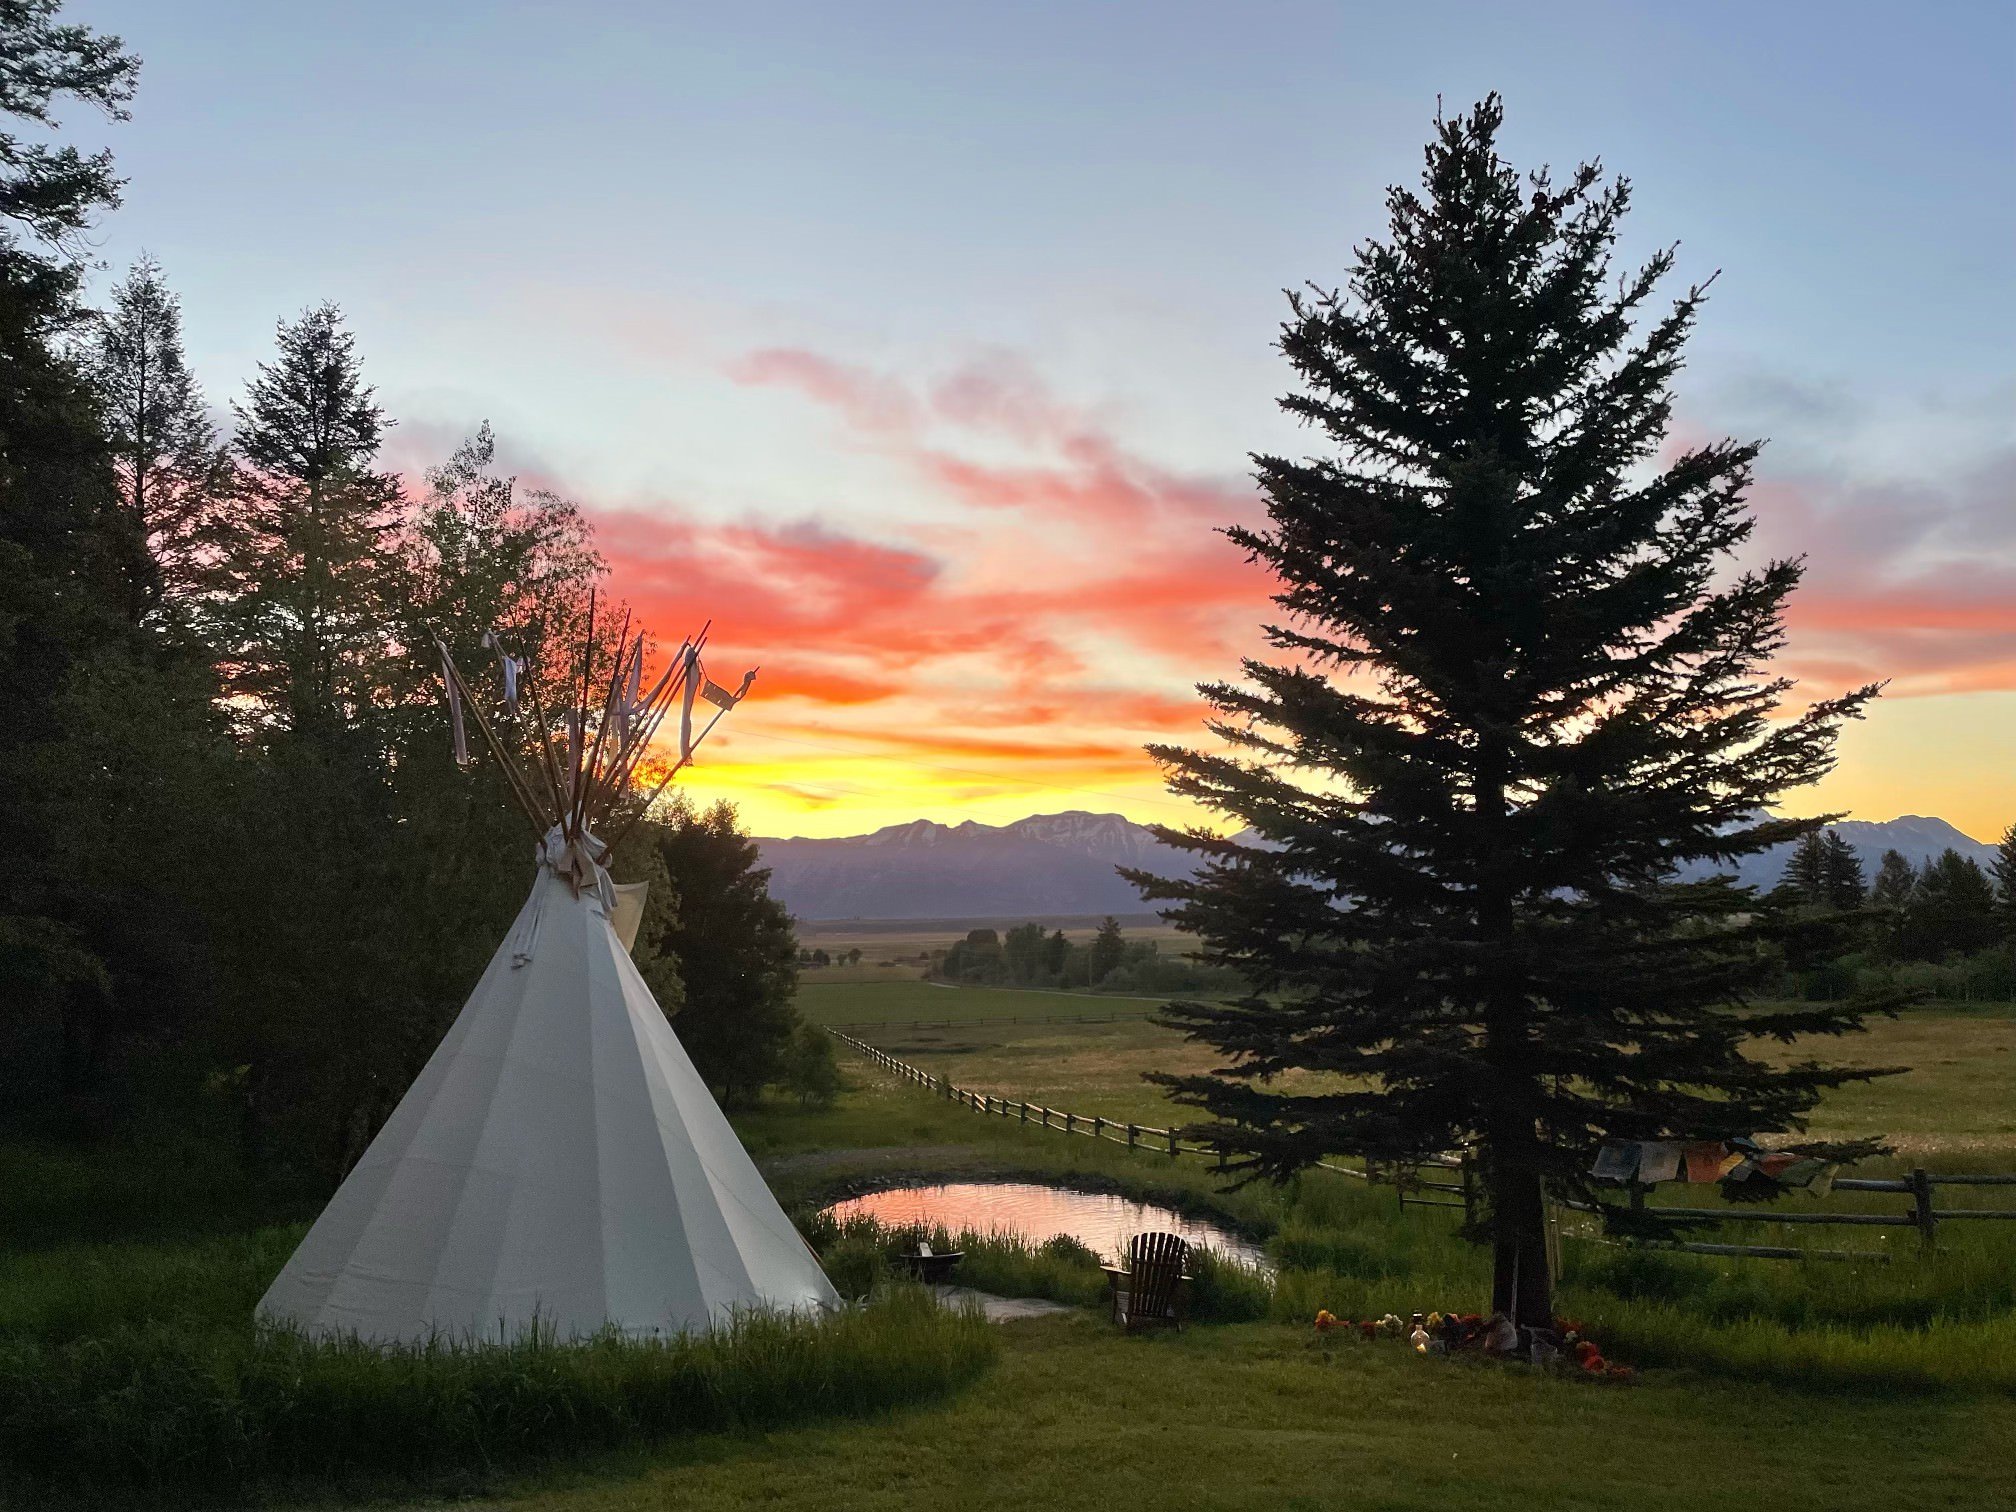 tipi-and-tree-at-sunset.jpg